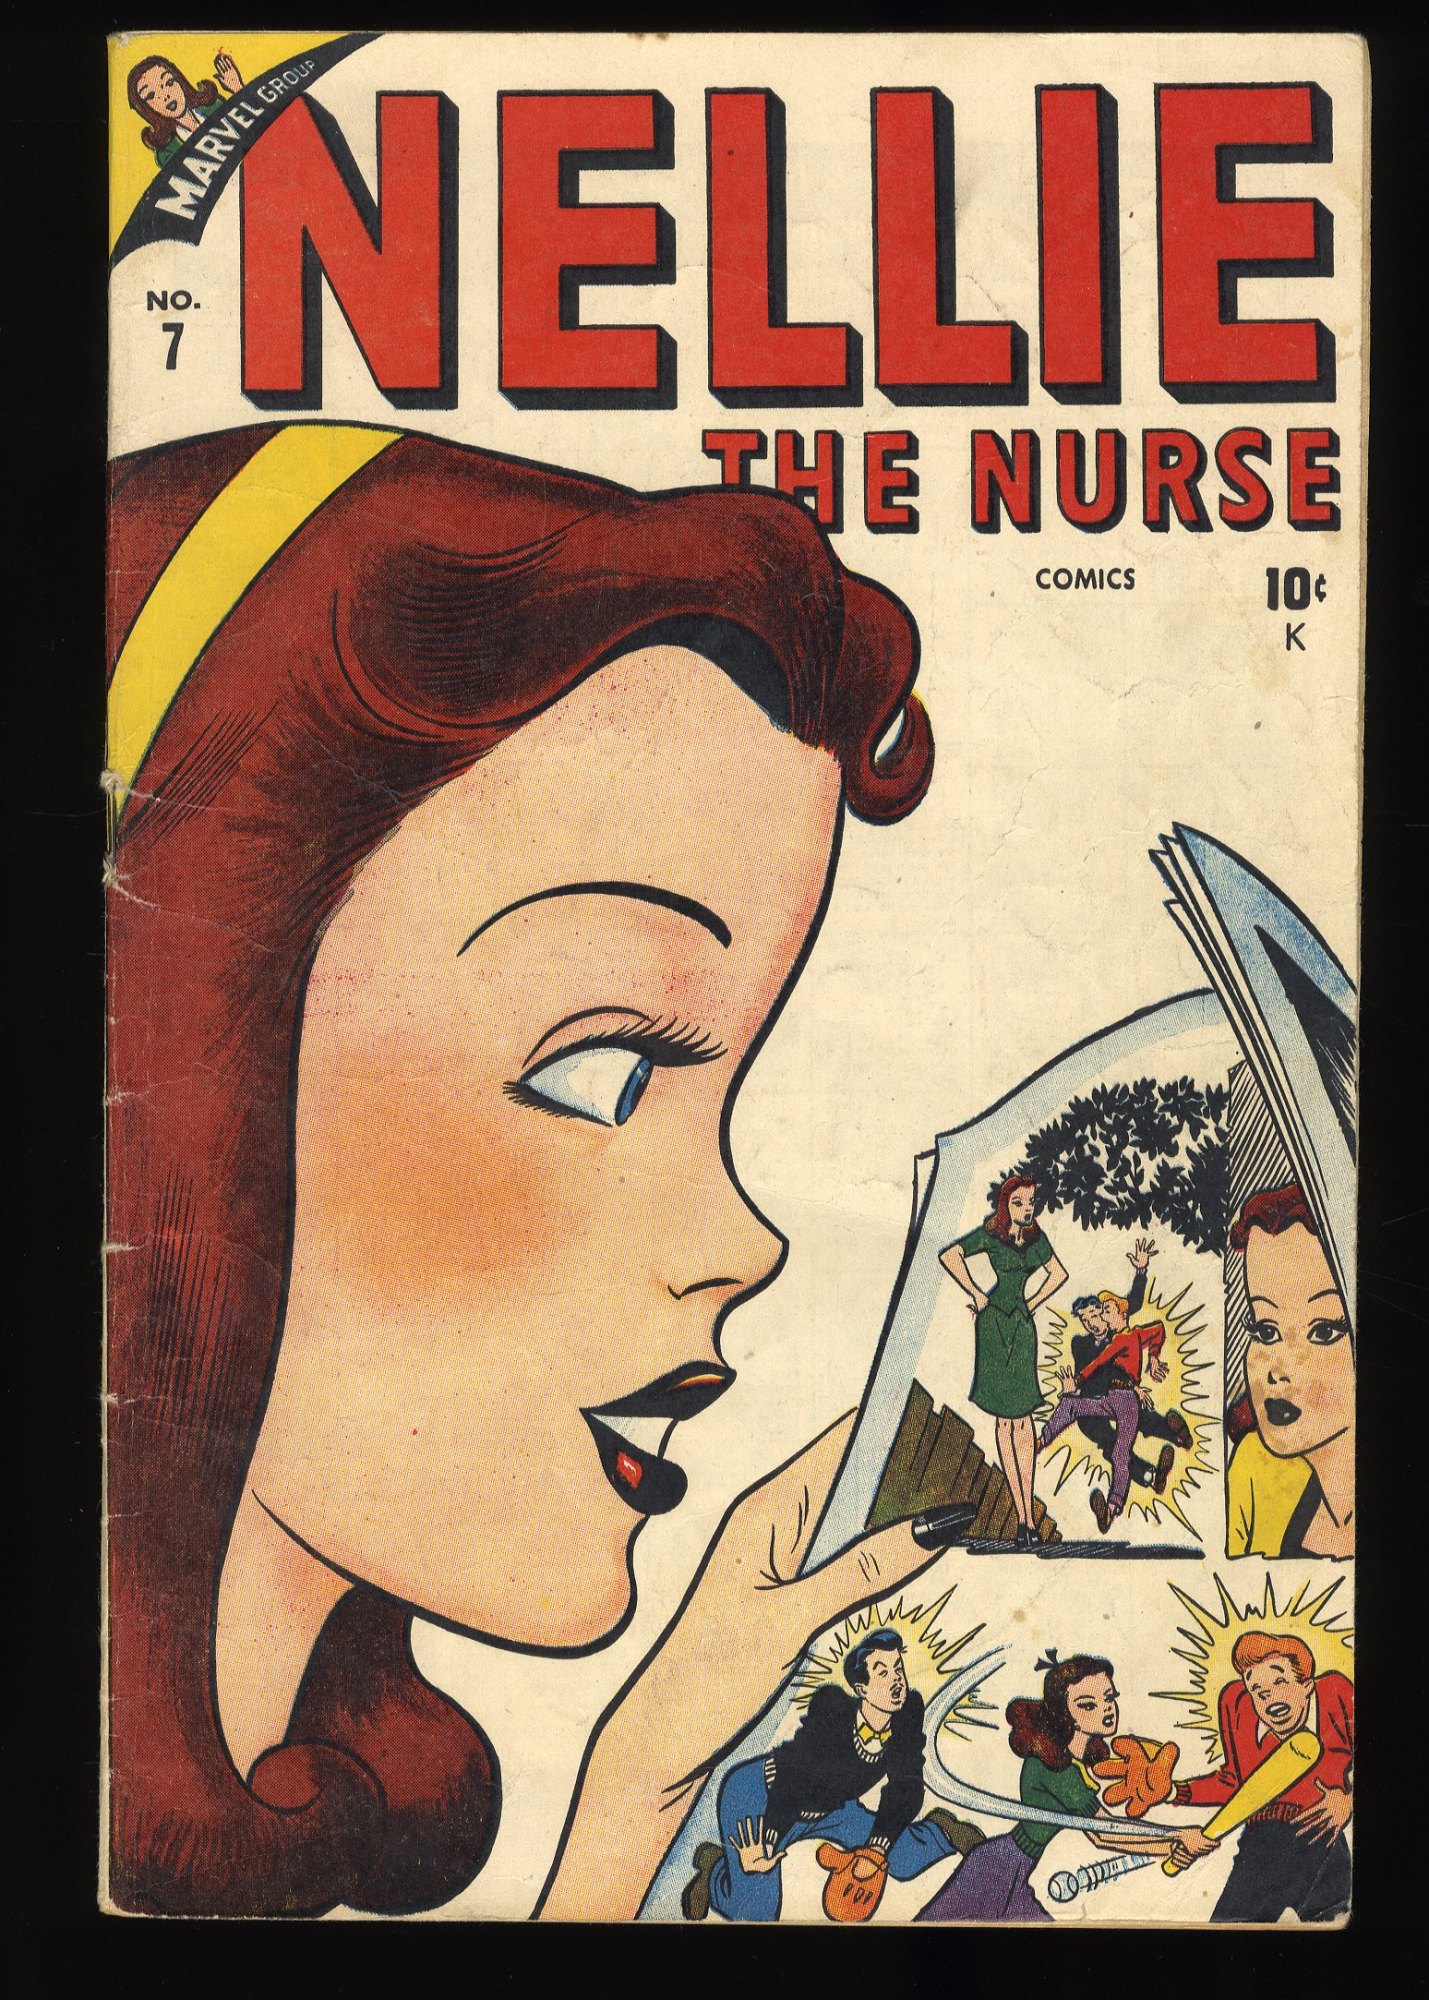 Image: Nellie the Nurse #7 VG+ 4.5 Golden Age Timely Comic!